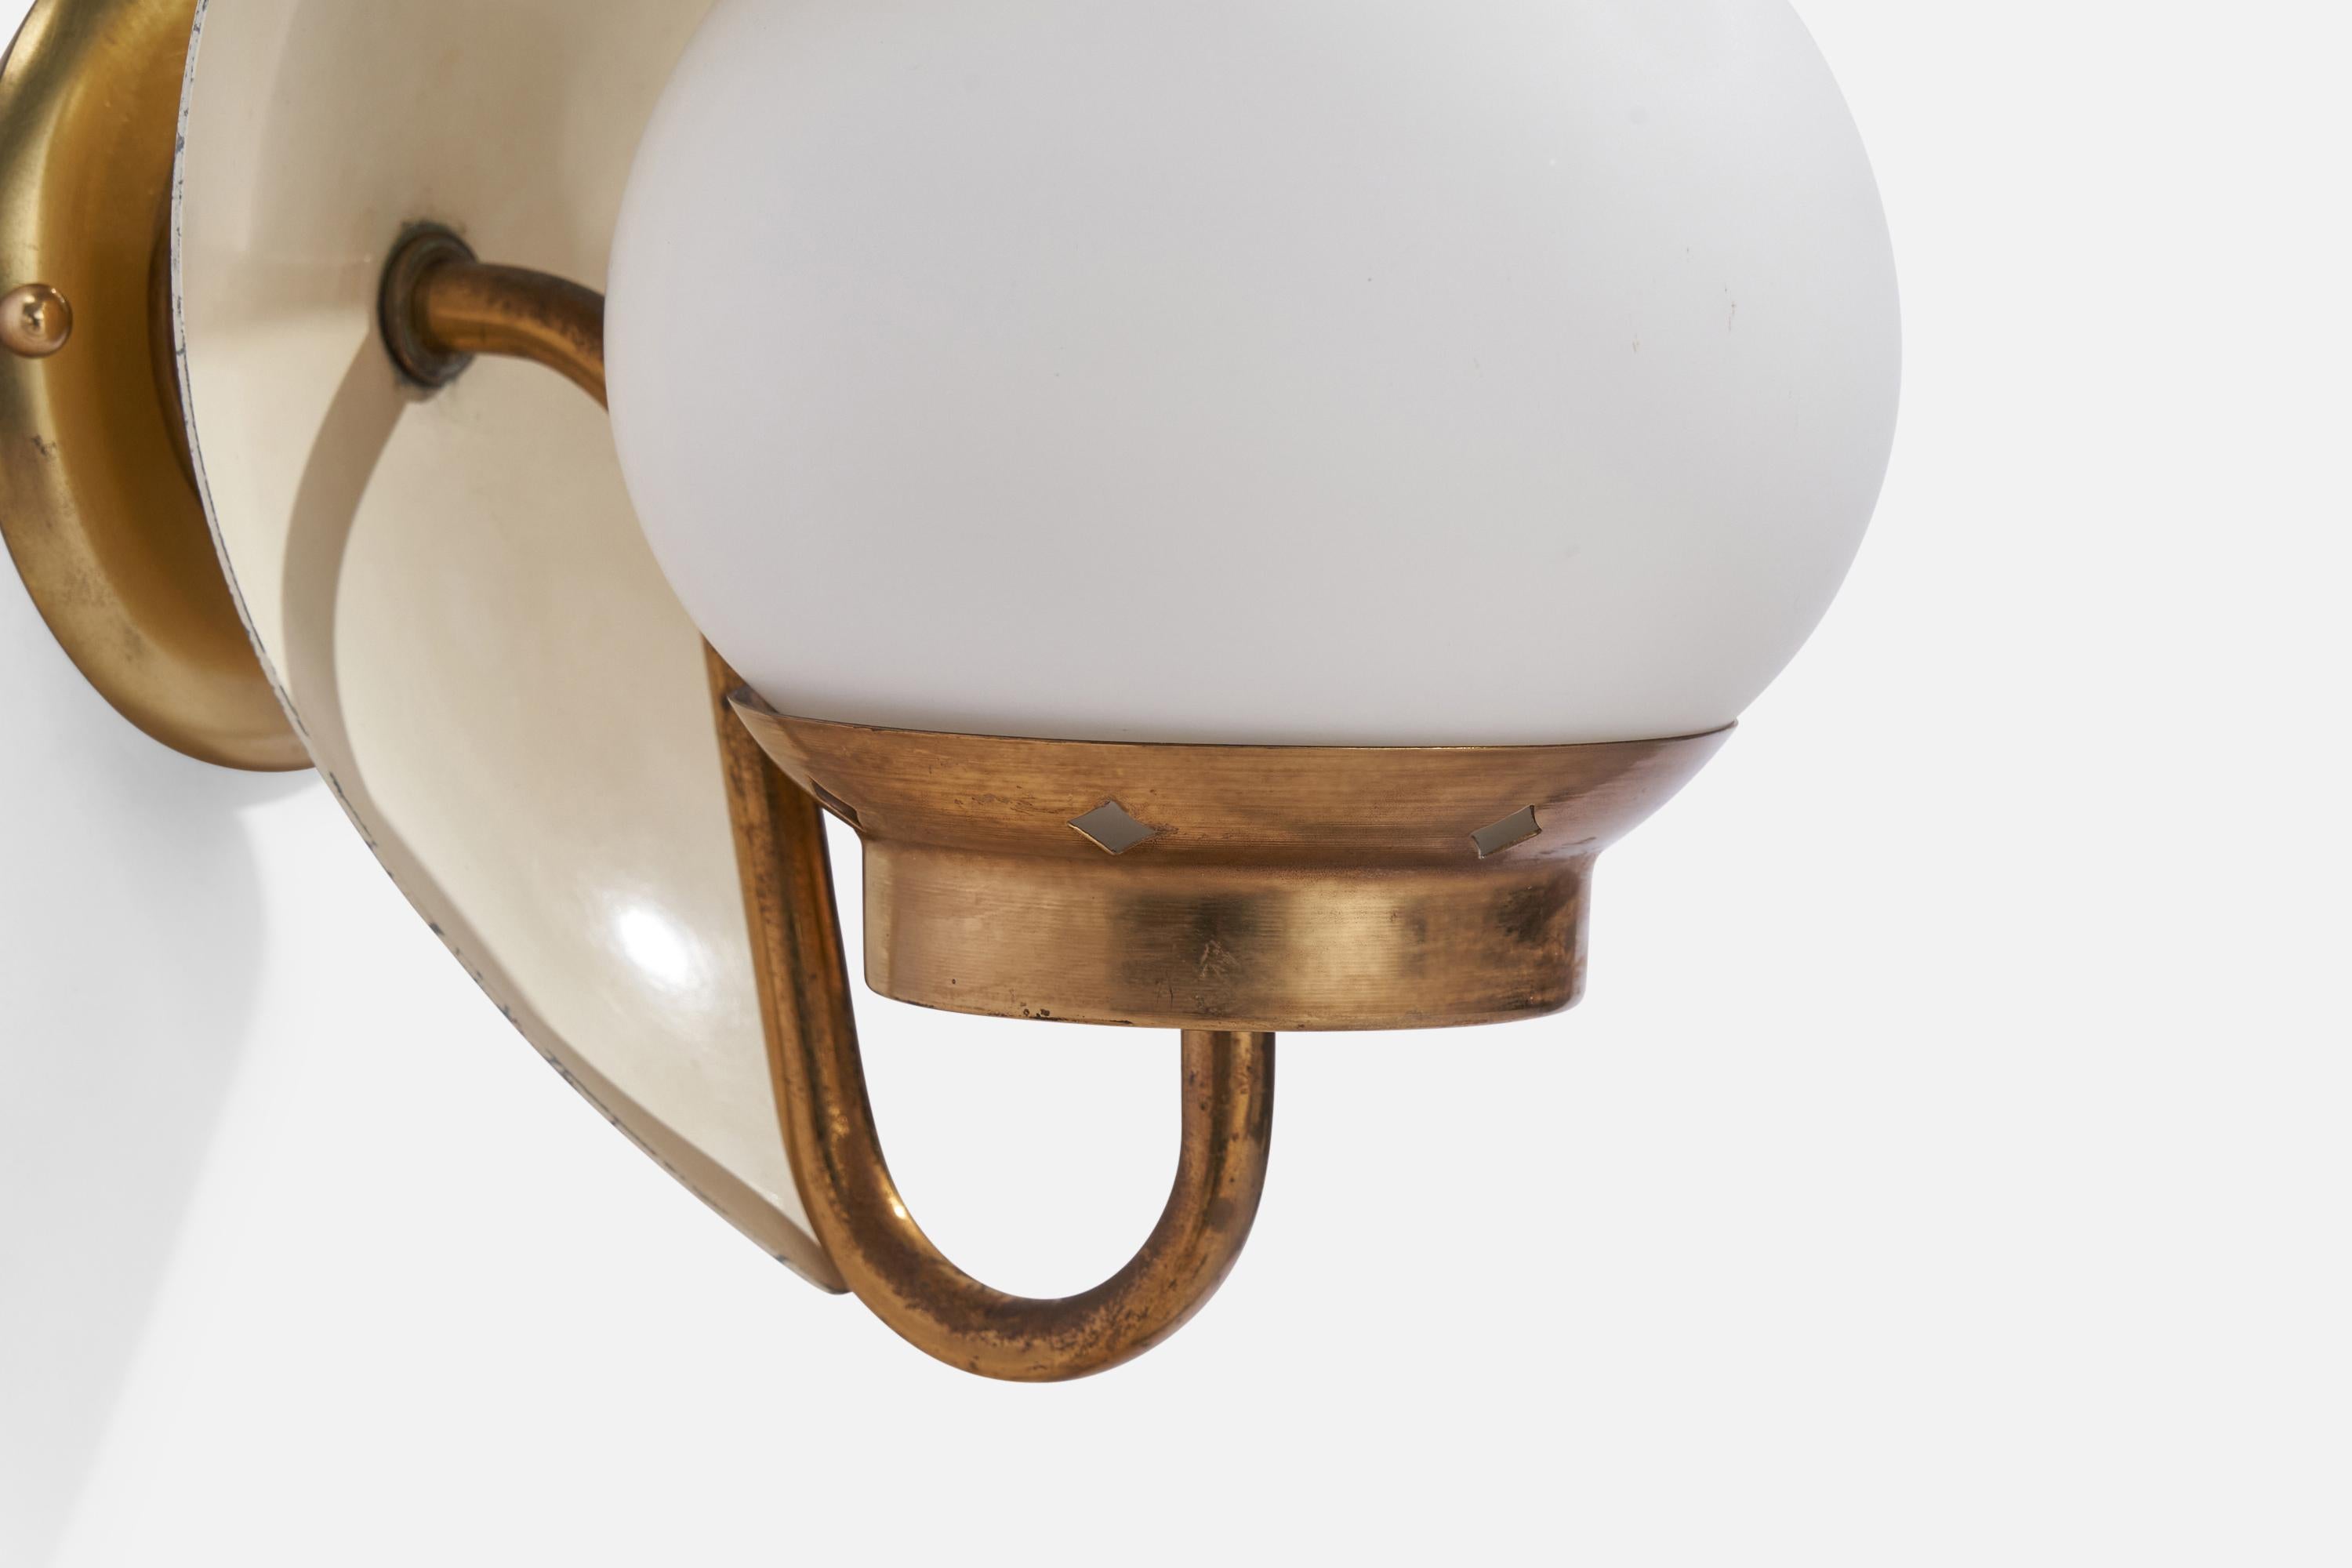 Bent Karlby, Wall Lights, Brass, Metal, Glass, Denmark, 1960s In Good Condition For Sale In High Point, NC